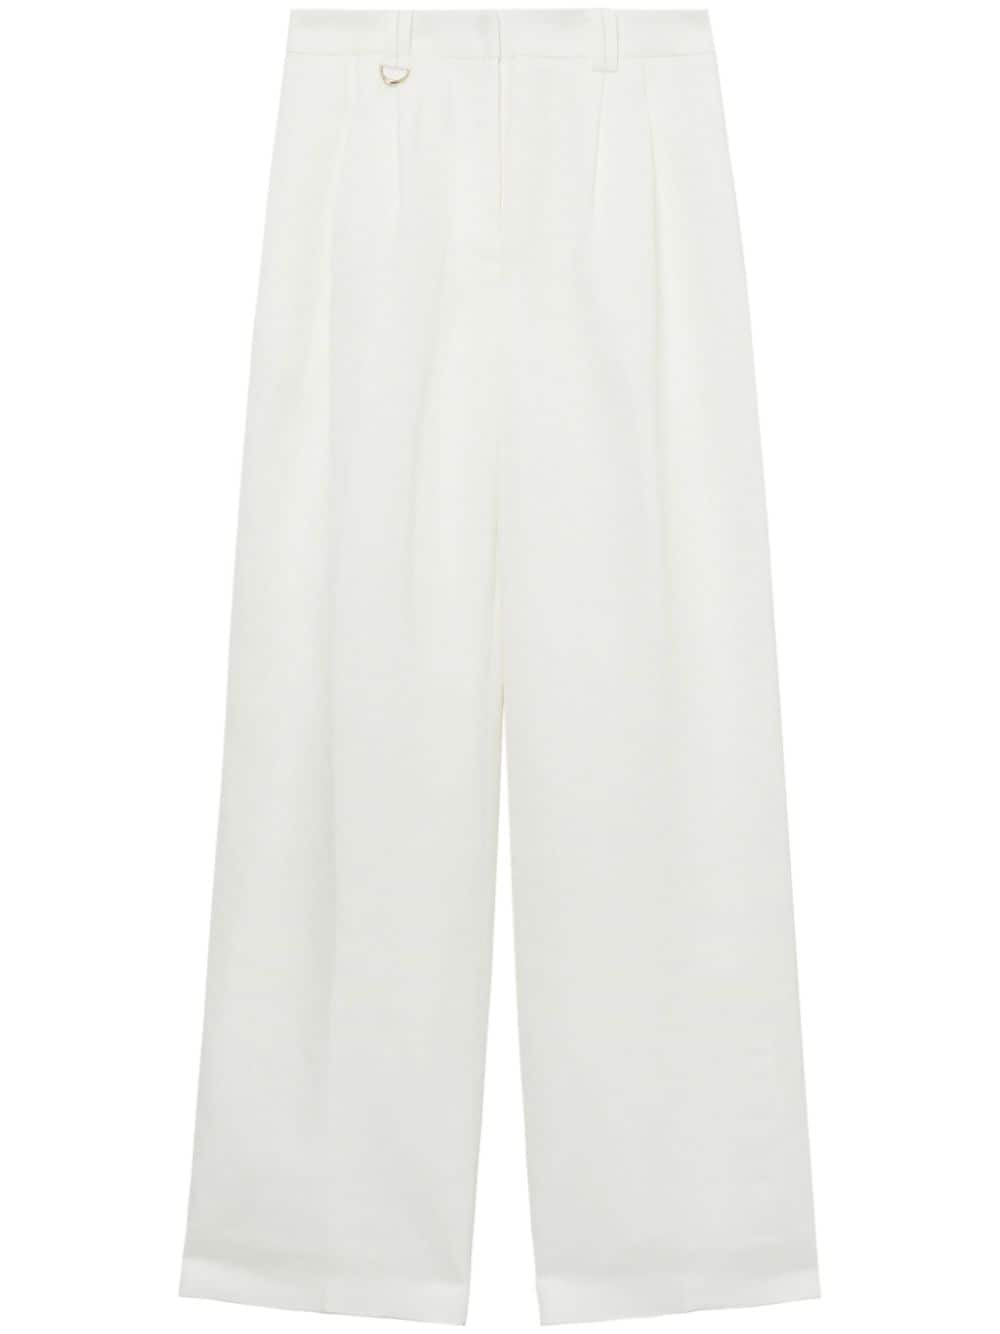 Aje Portray tailored trousers - White von Aje